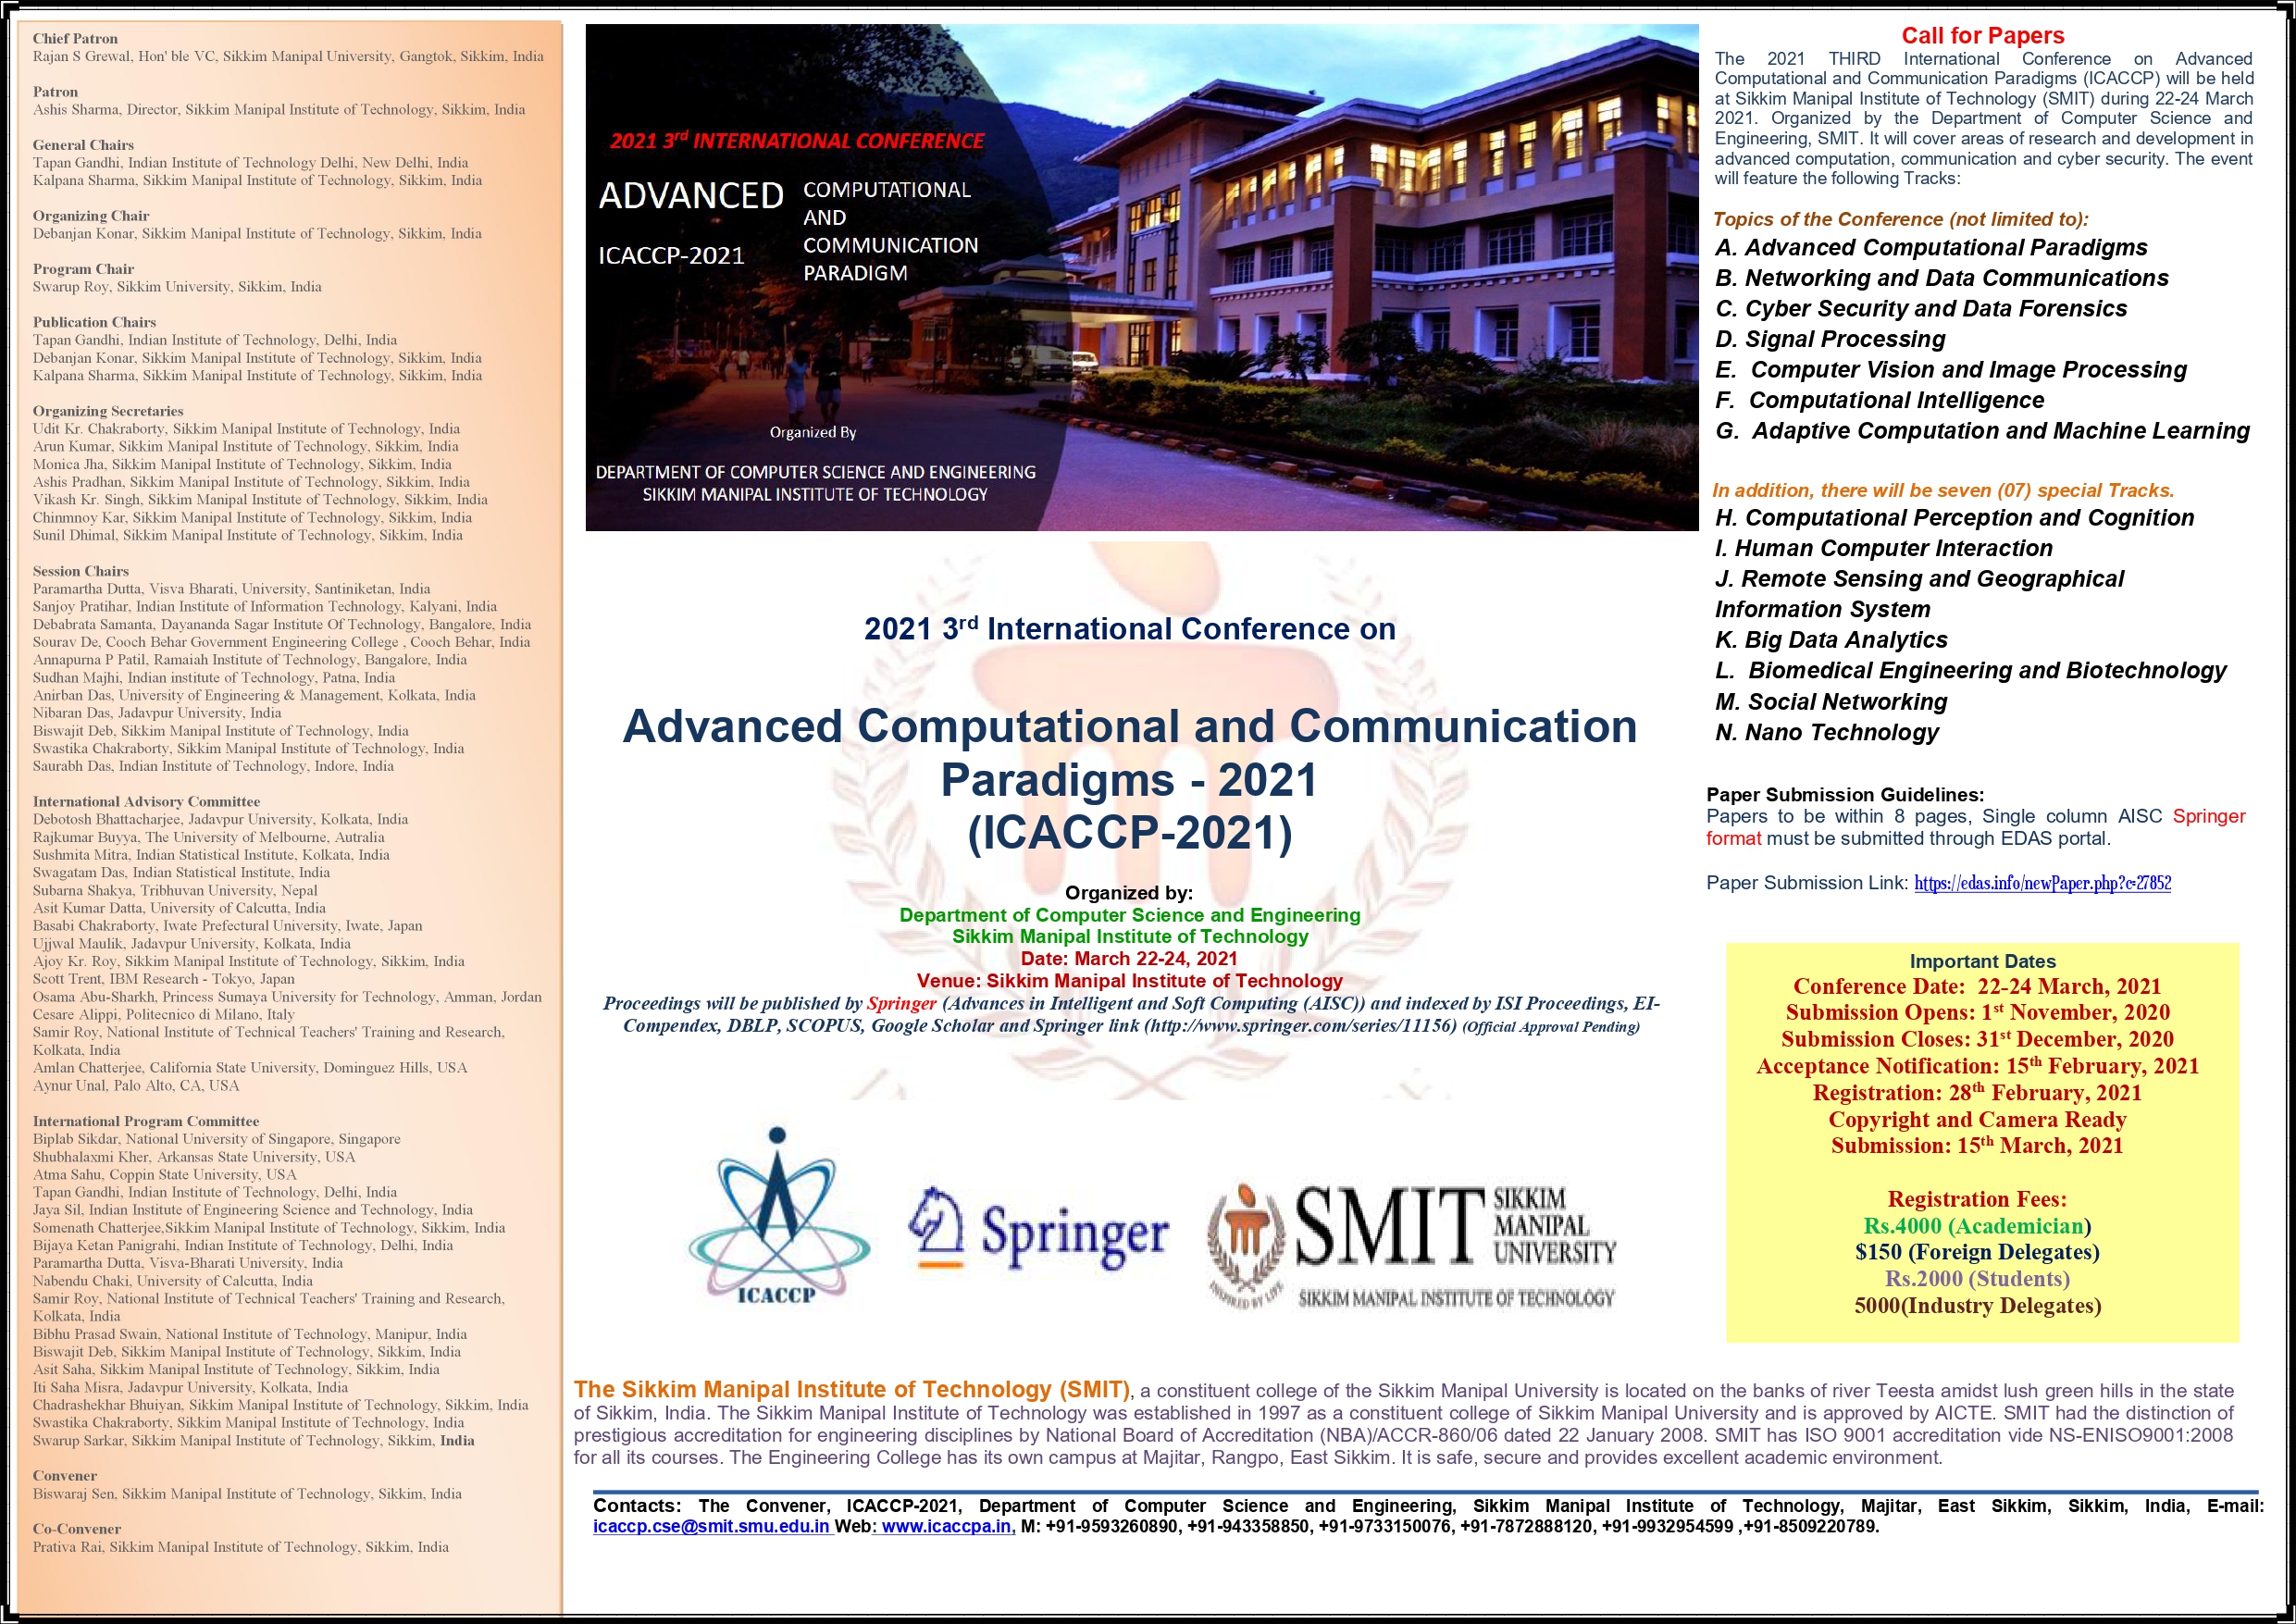 3rd International Conference on Advanced Computational and Communication Paradigms (ICACCP-2021)